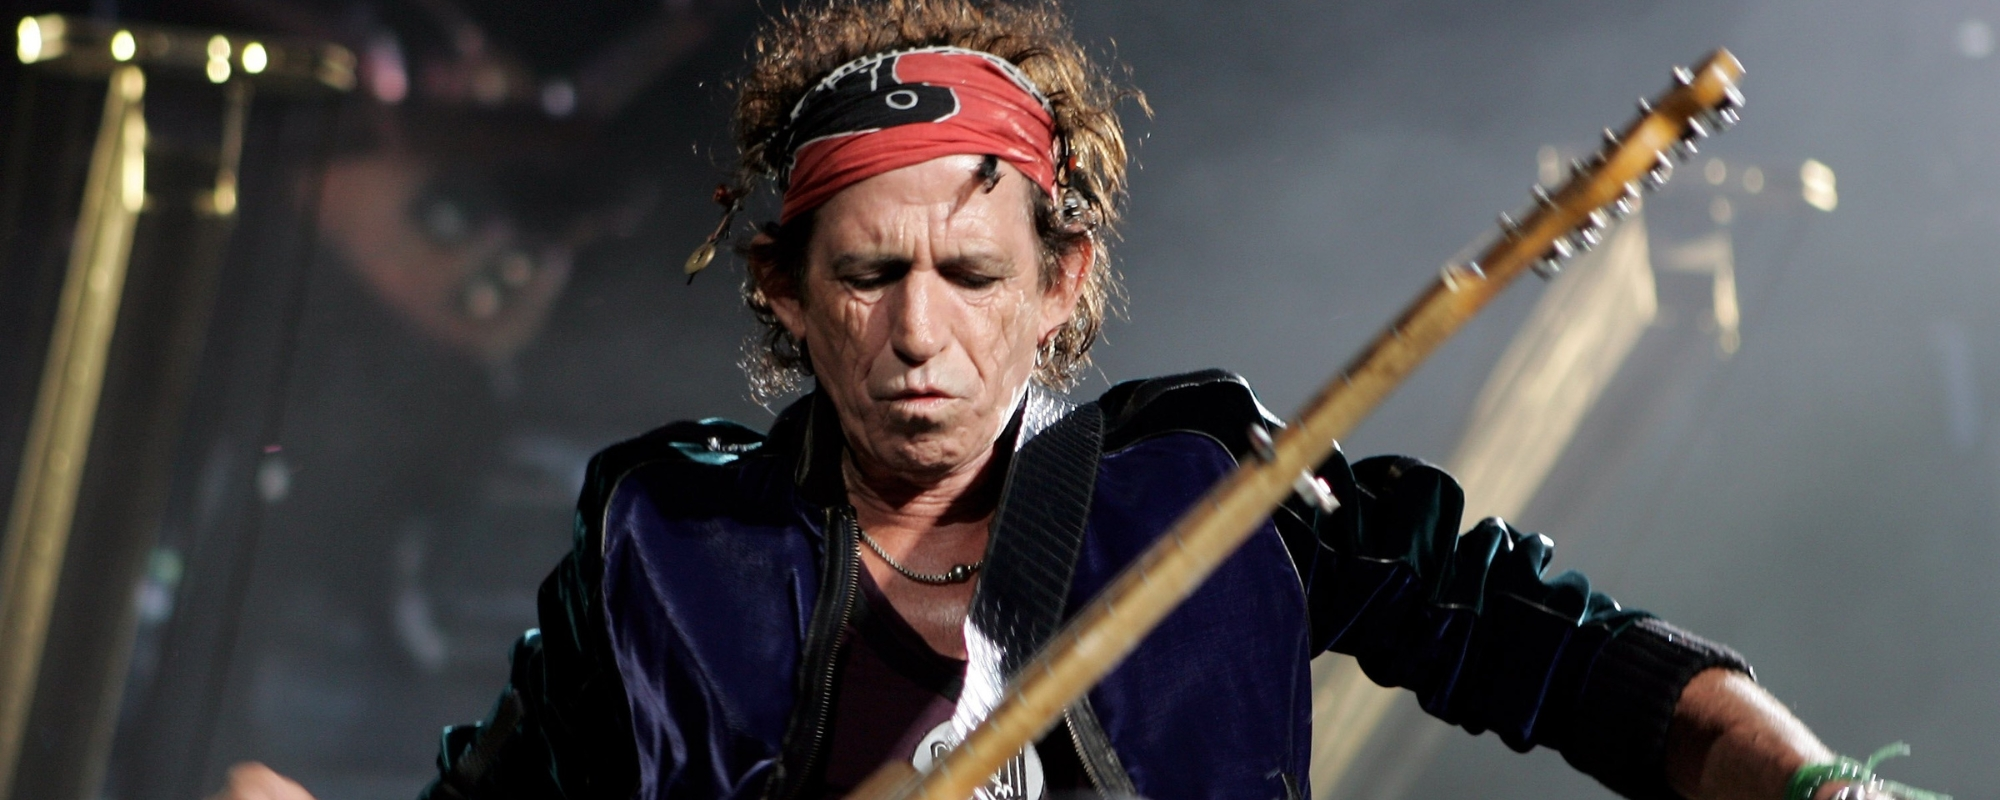 Keith Richards’ Favorite Guitarist: “One of the Great Riff Masters”